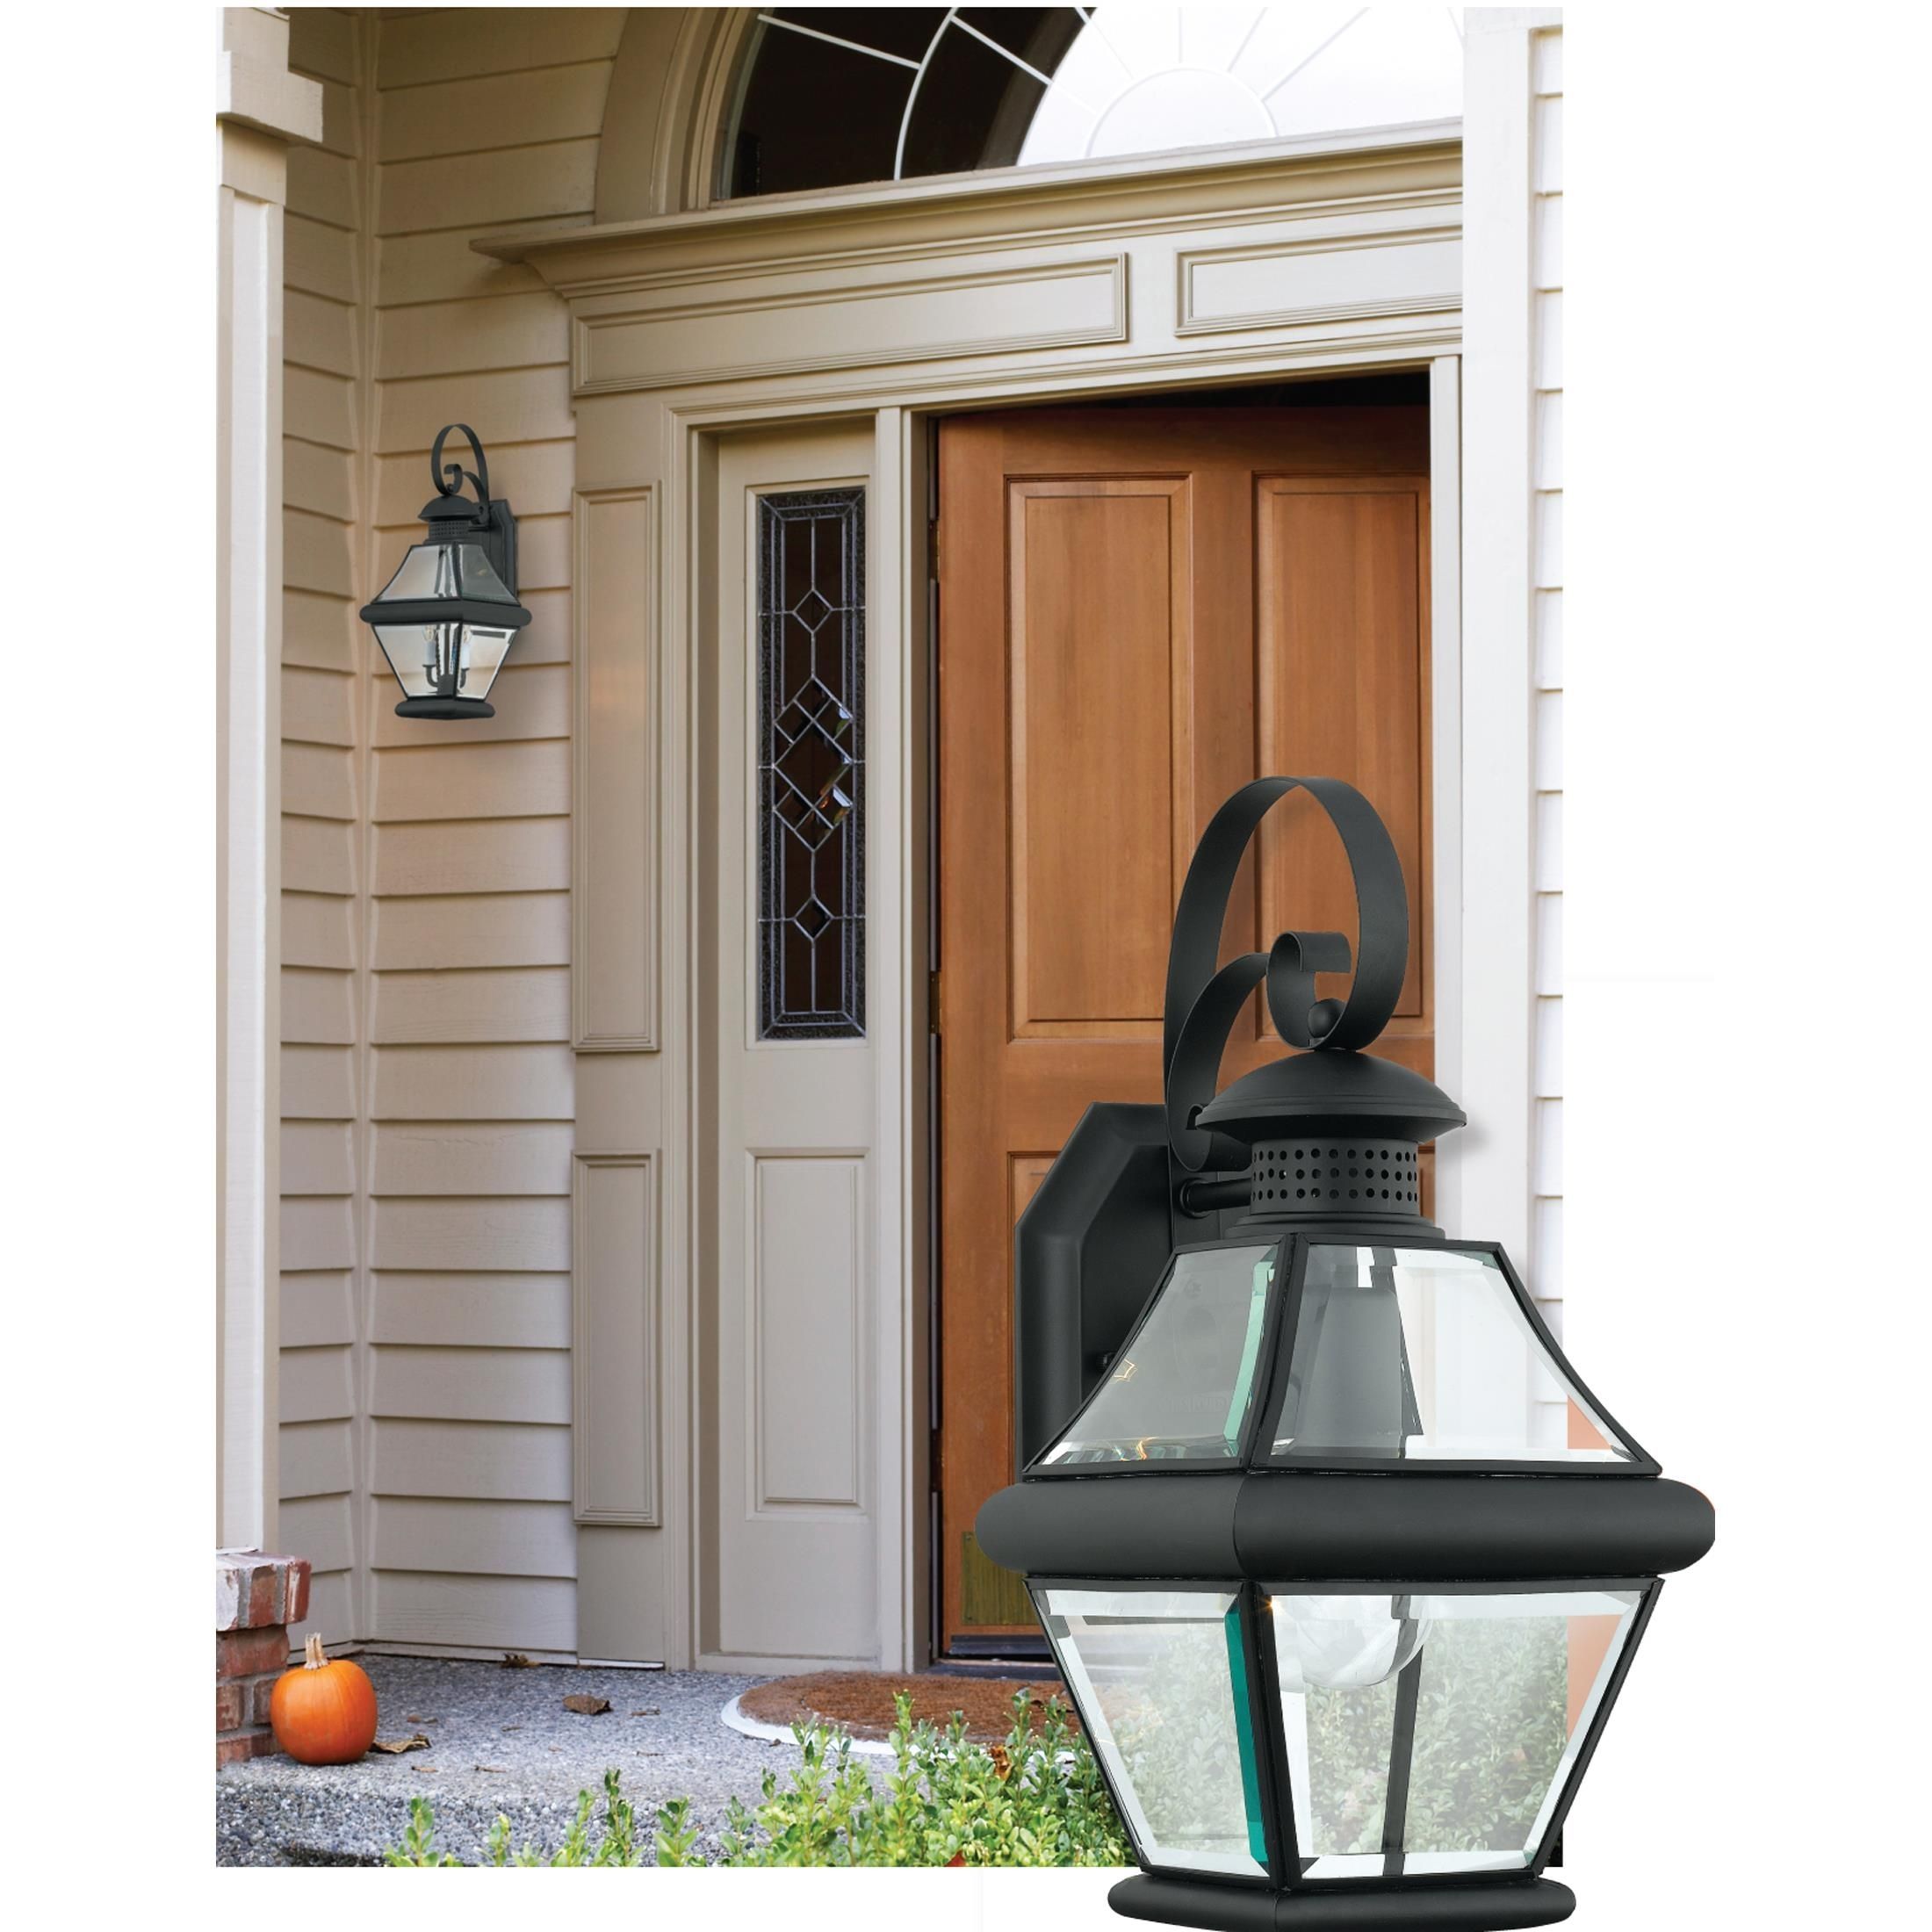 Quoizel Lighting Ny8315k Shipped Direct Pertaining To Quoizel Outdoor Lanterns (View 16 of 20)